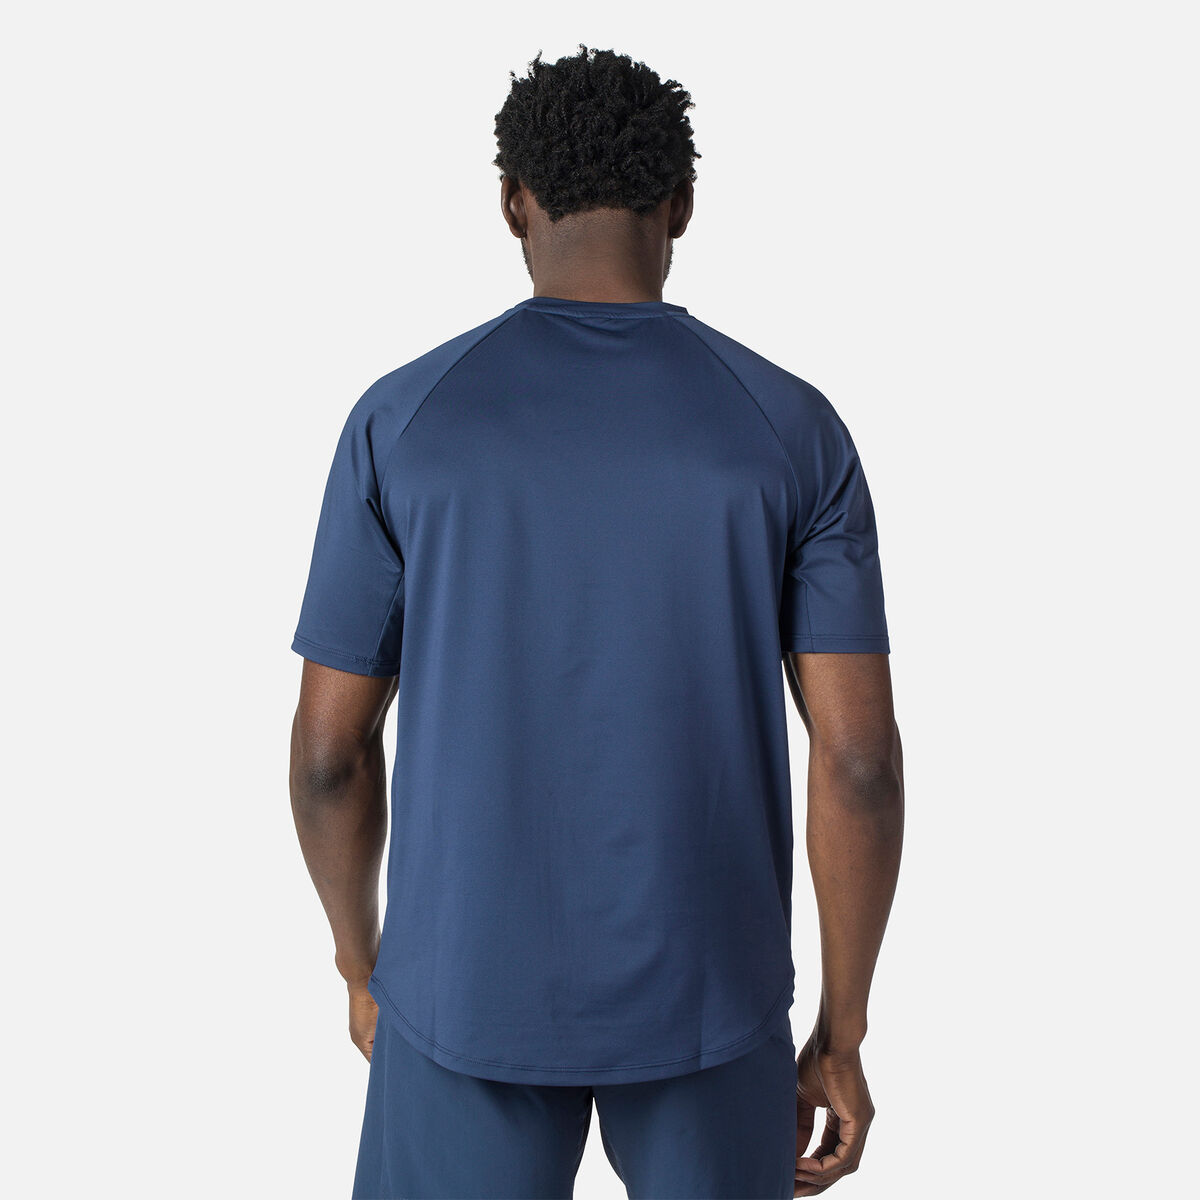 Men's short sleeve jersey relaxed fit